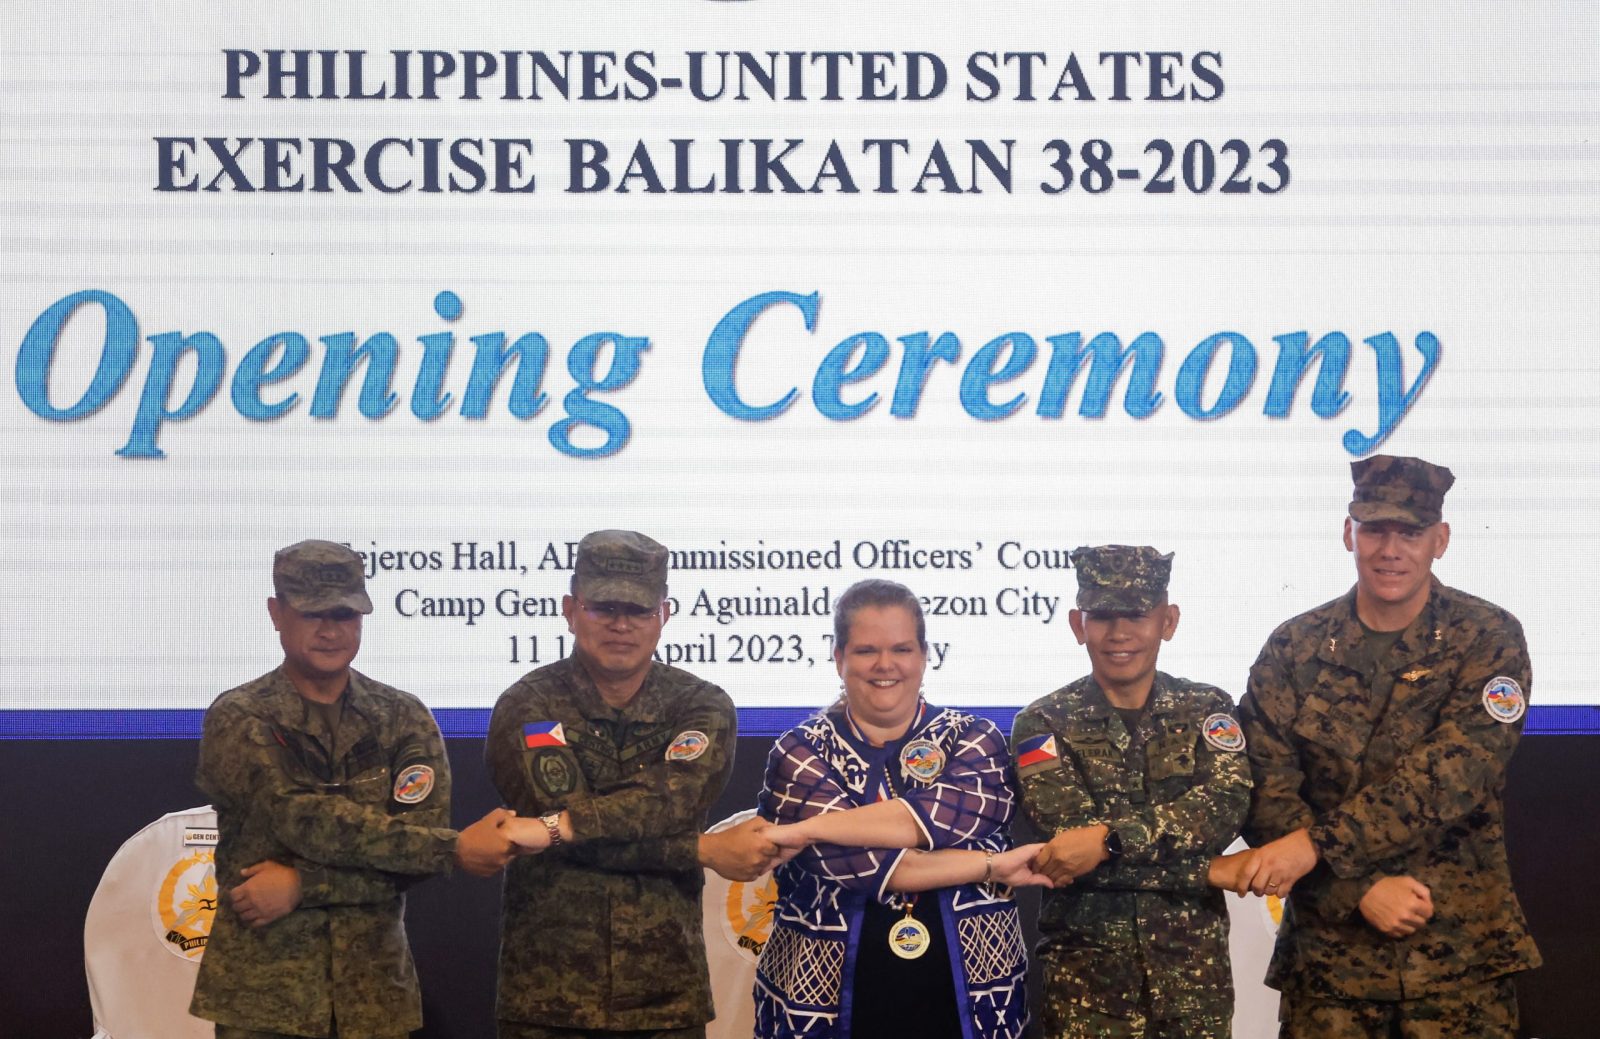 epa10567997 (L-R) Philippine Army Major General Marvin Licudine, Armed Forces of the Philippines Chief-of-Staff General Andres Centino, United States Charge d'Affaires Heather Variava, Philippine Navy (Marines) Brigadier General Noel Belaran and United States Marine Corps Major General Eric Austin link arms during the opening ceremony of the 38th Philippines-US 'Balikatan' exercise at Camp Aguinaldo in Quezon City, Metro Manila, Philippines 11 April 2023. 'Balikatan', or shoulder-to-shoulder, exercises will involve some 17,600 Philippines and US troops cooperating to develop mutual defense capability, counter-terrorism, strengthen maritime security efforts and address shared extremist threats.  EPA/ROLEX DELA PENA